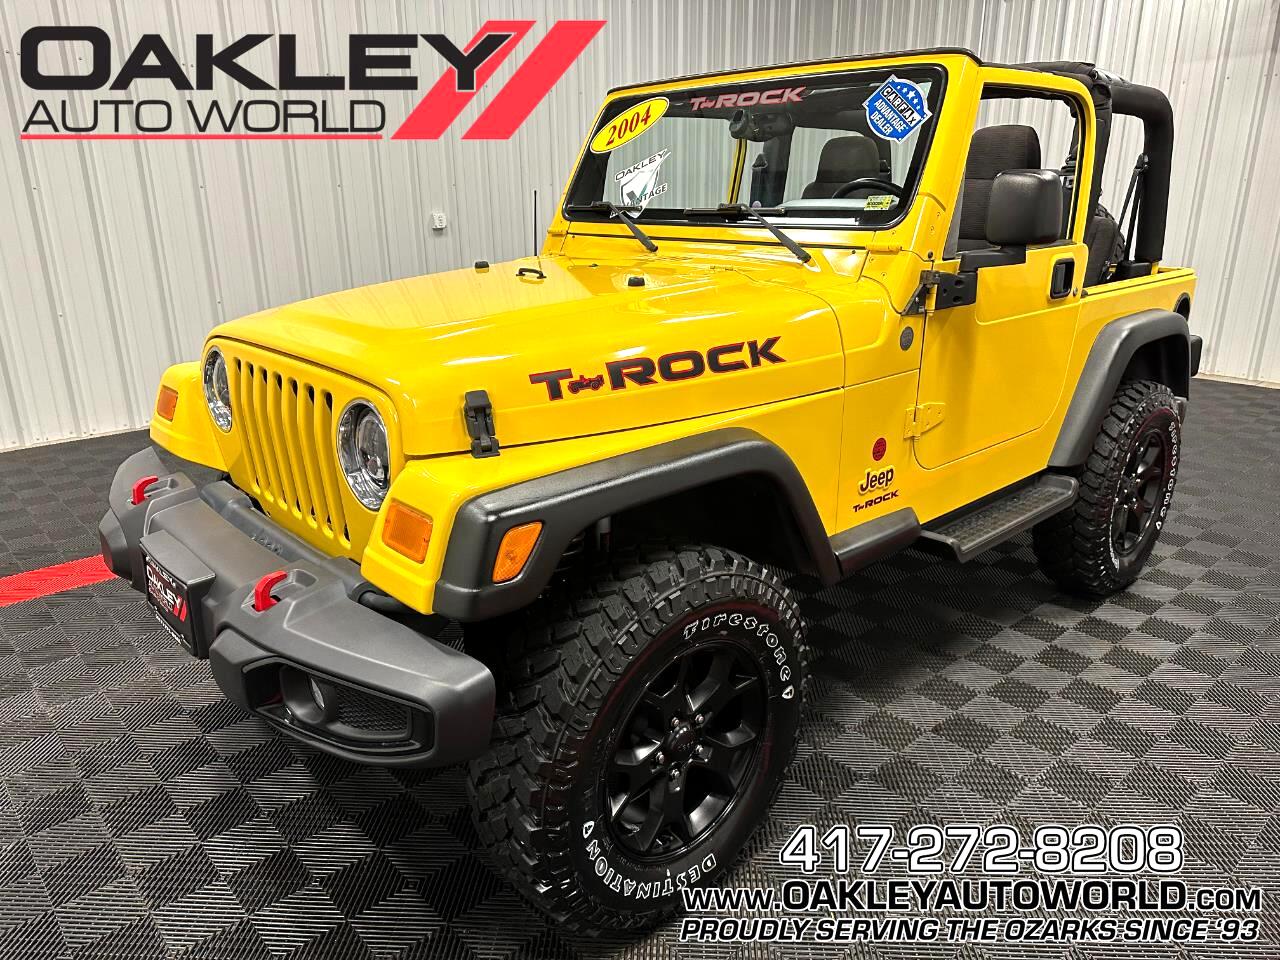 Used 2004 Jeep Wrangler T-ROCK Lifted 4x4 for Sale in Branson West MO 65737  Oakley Auto World